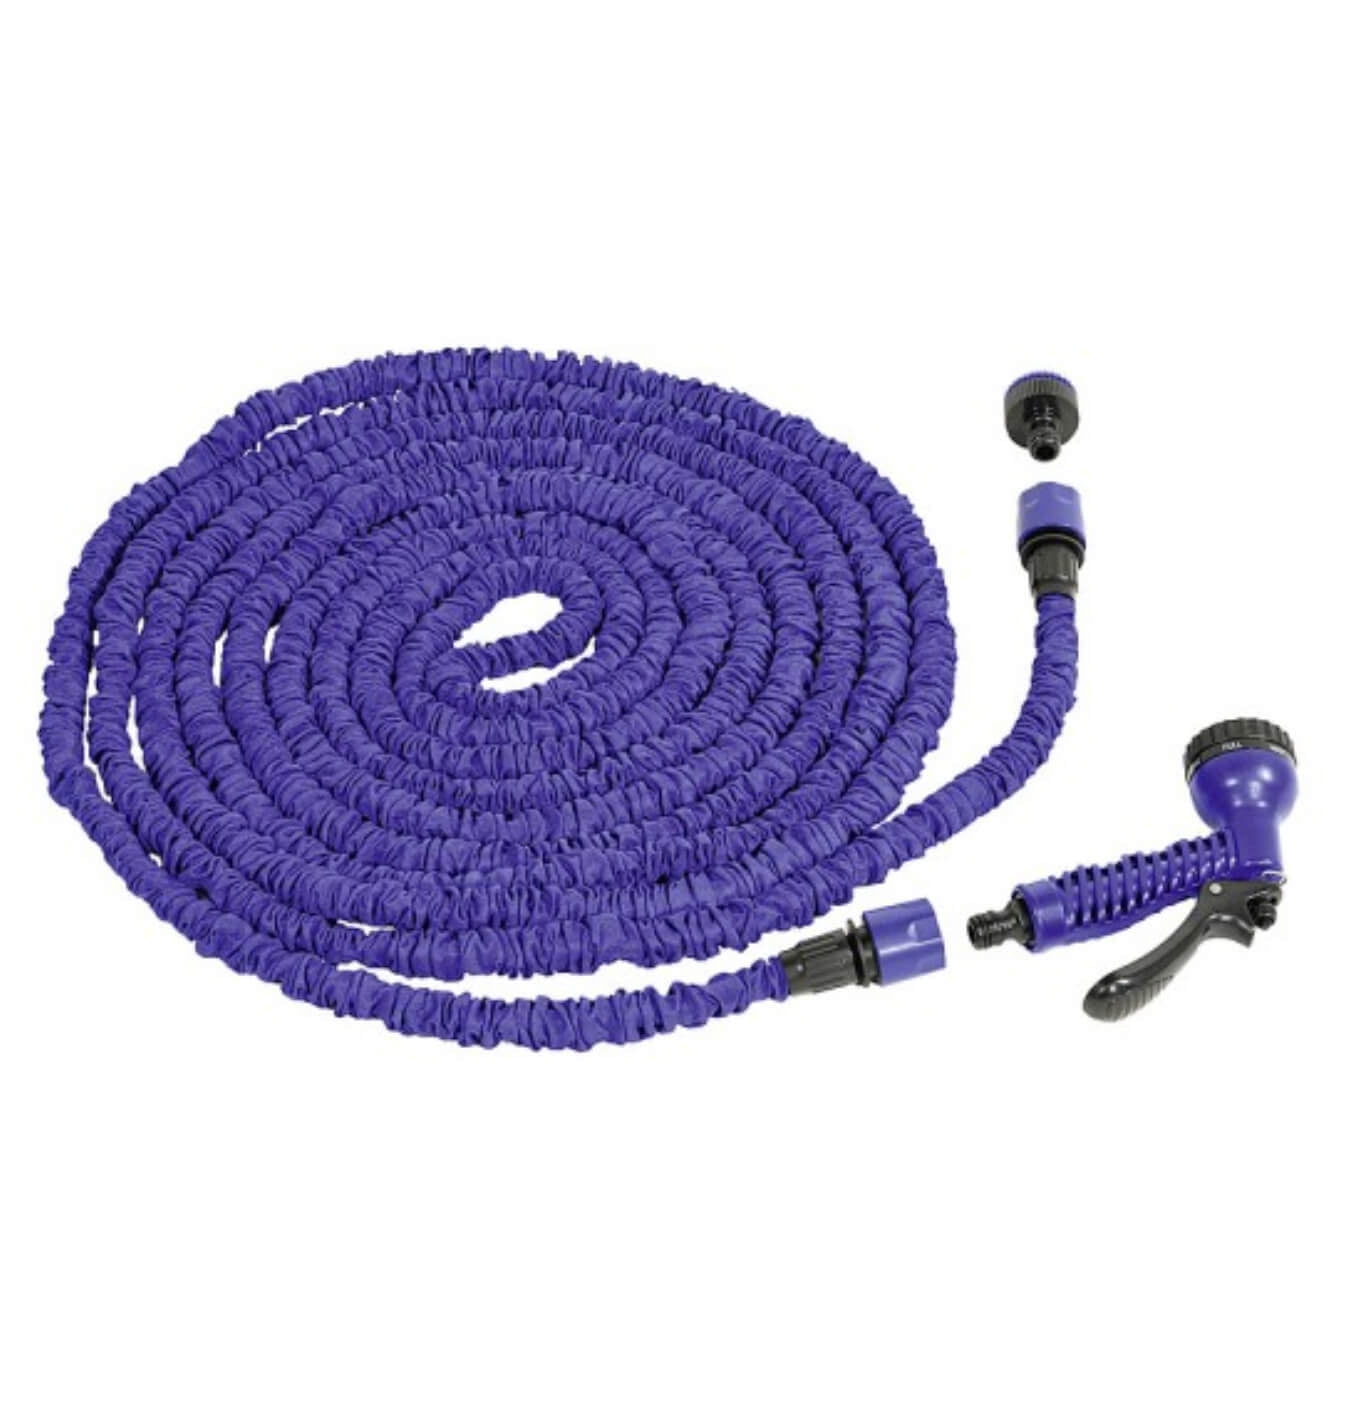 Yachticon Flex Stretchable Water Hose with Sprayer | 7.5 - 22.5 Metres Image